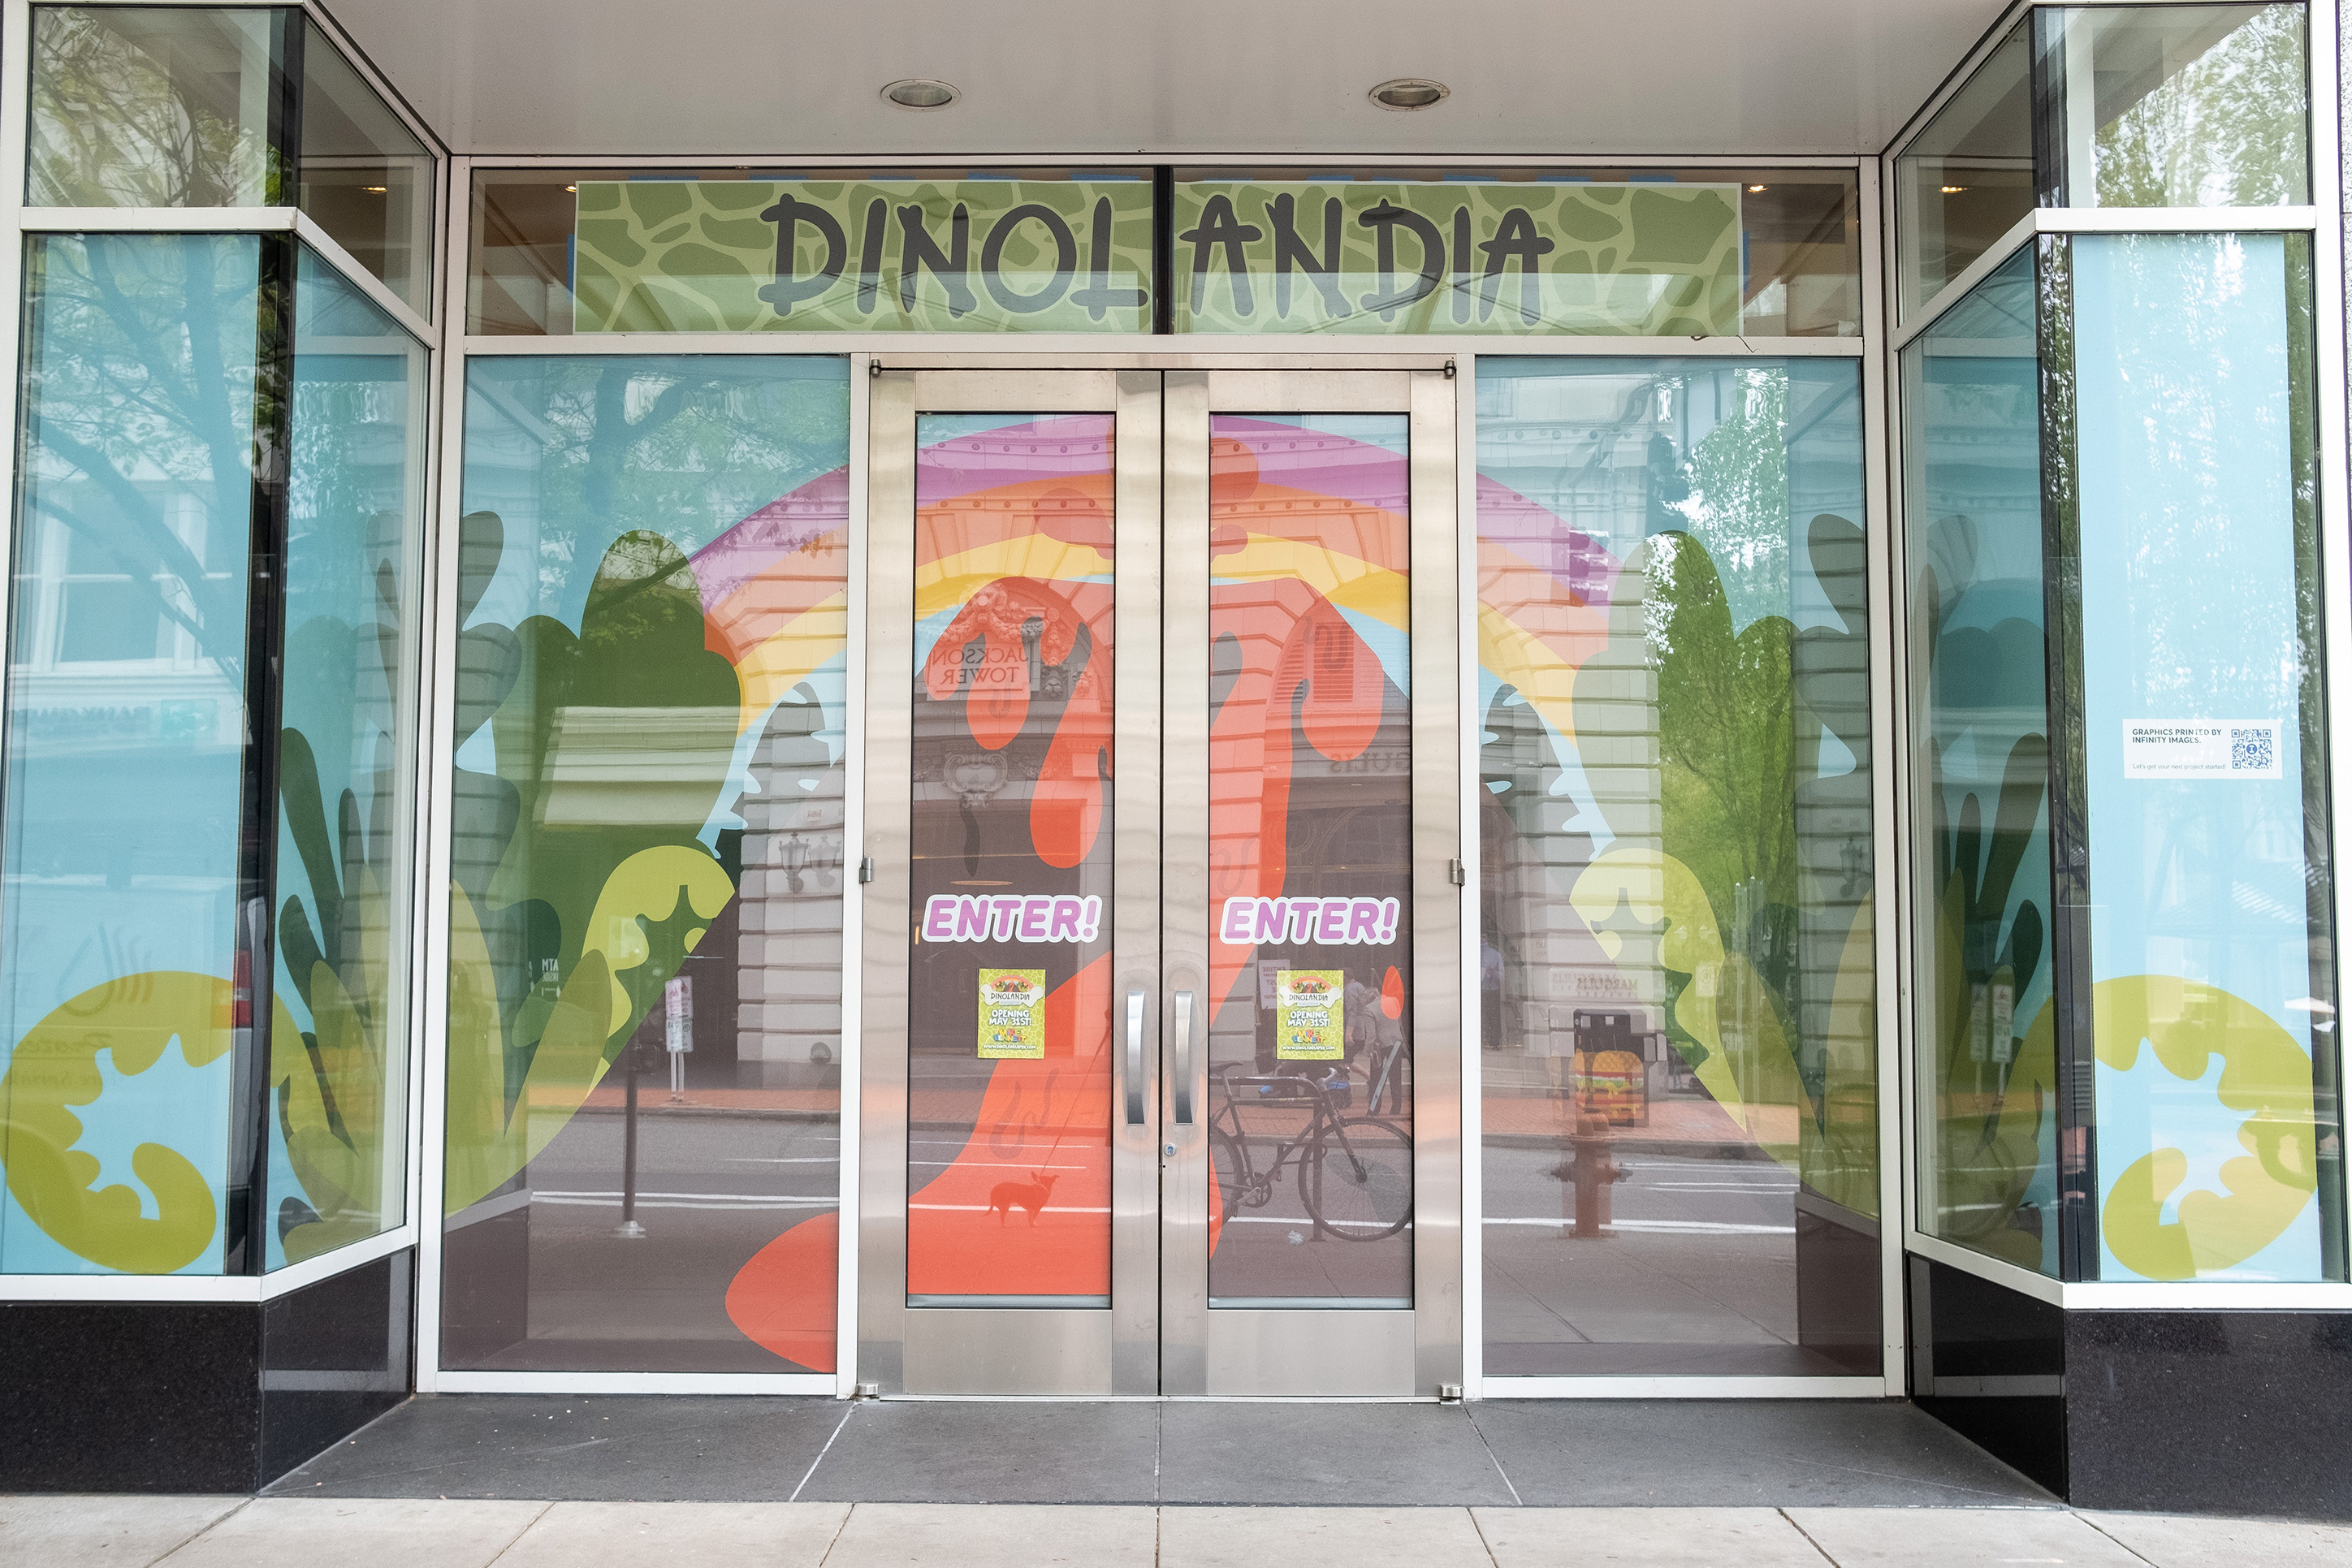 Dinolandia window graphics produced by Infinity Images.